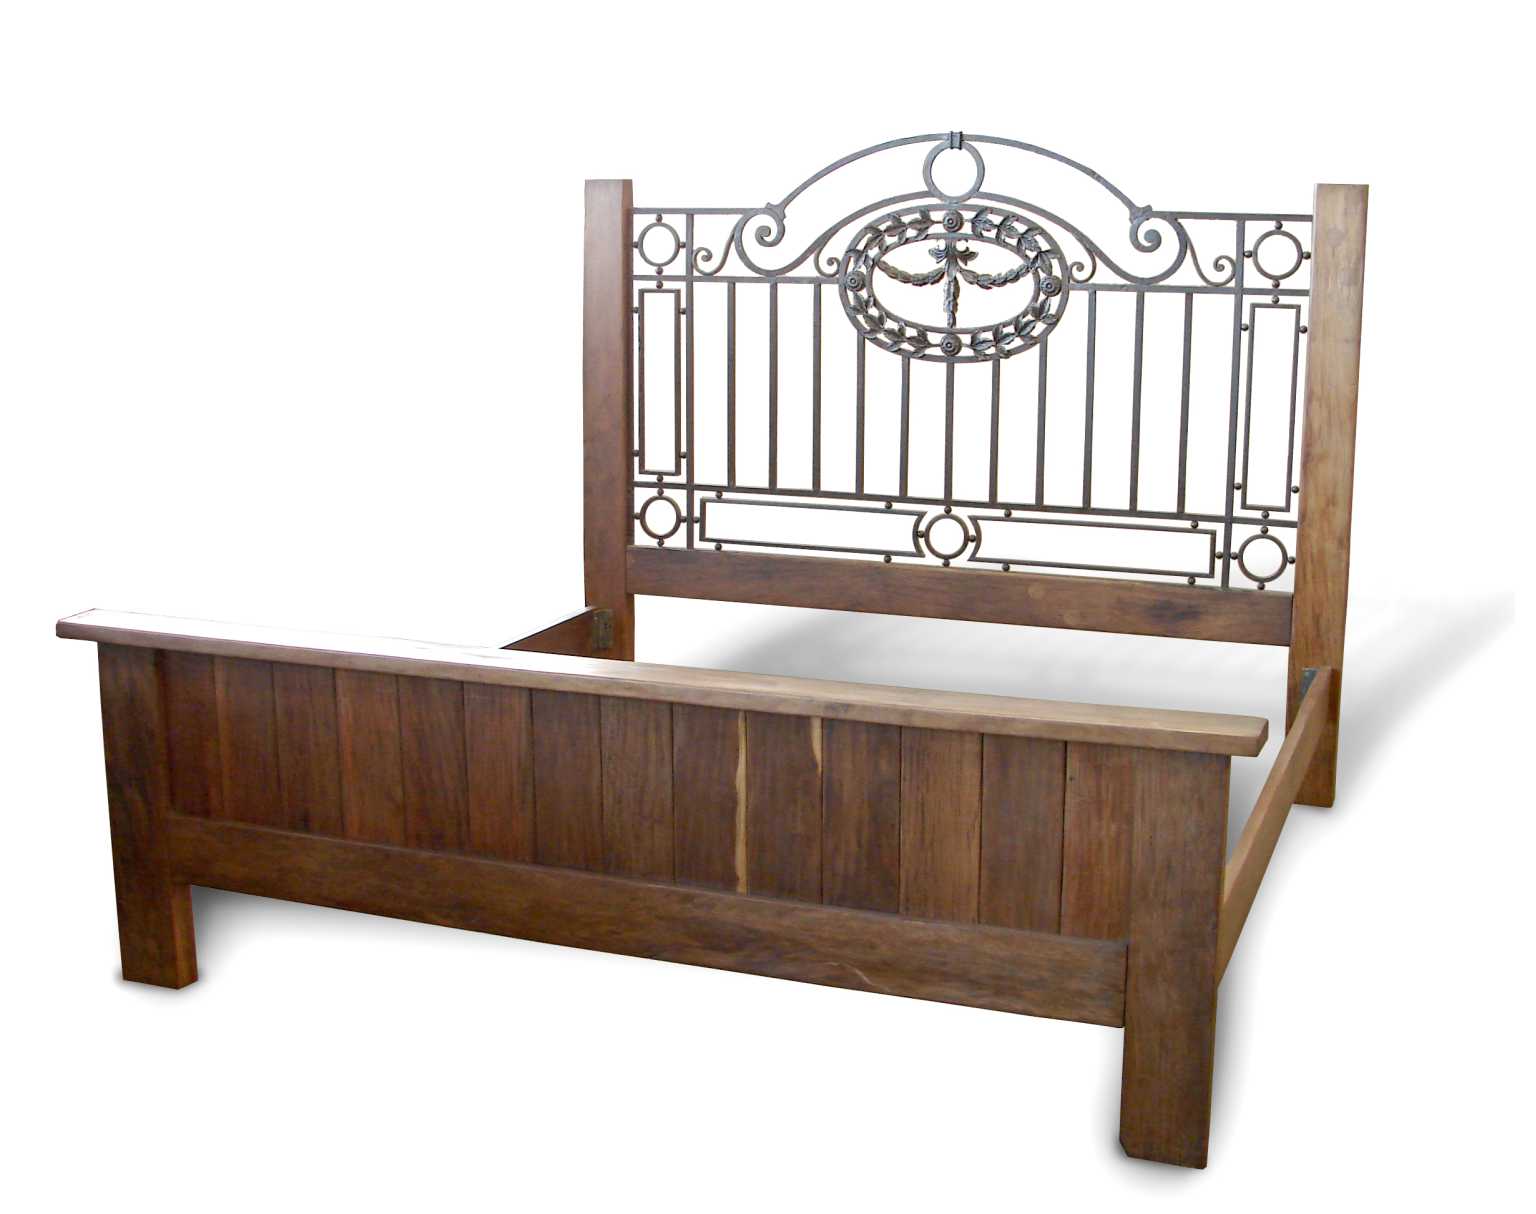 Antique King Bed with Wooden Frame and Foot Board, Iron Headboard and Wood Posts For Sale